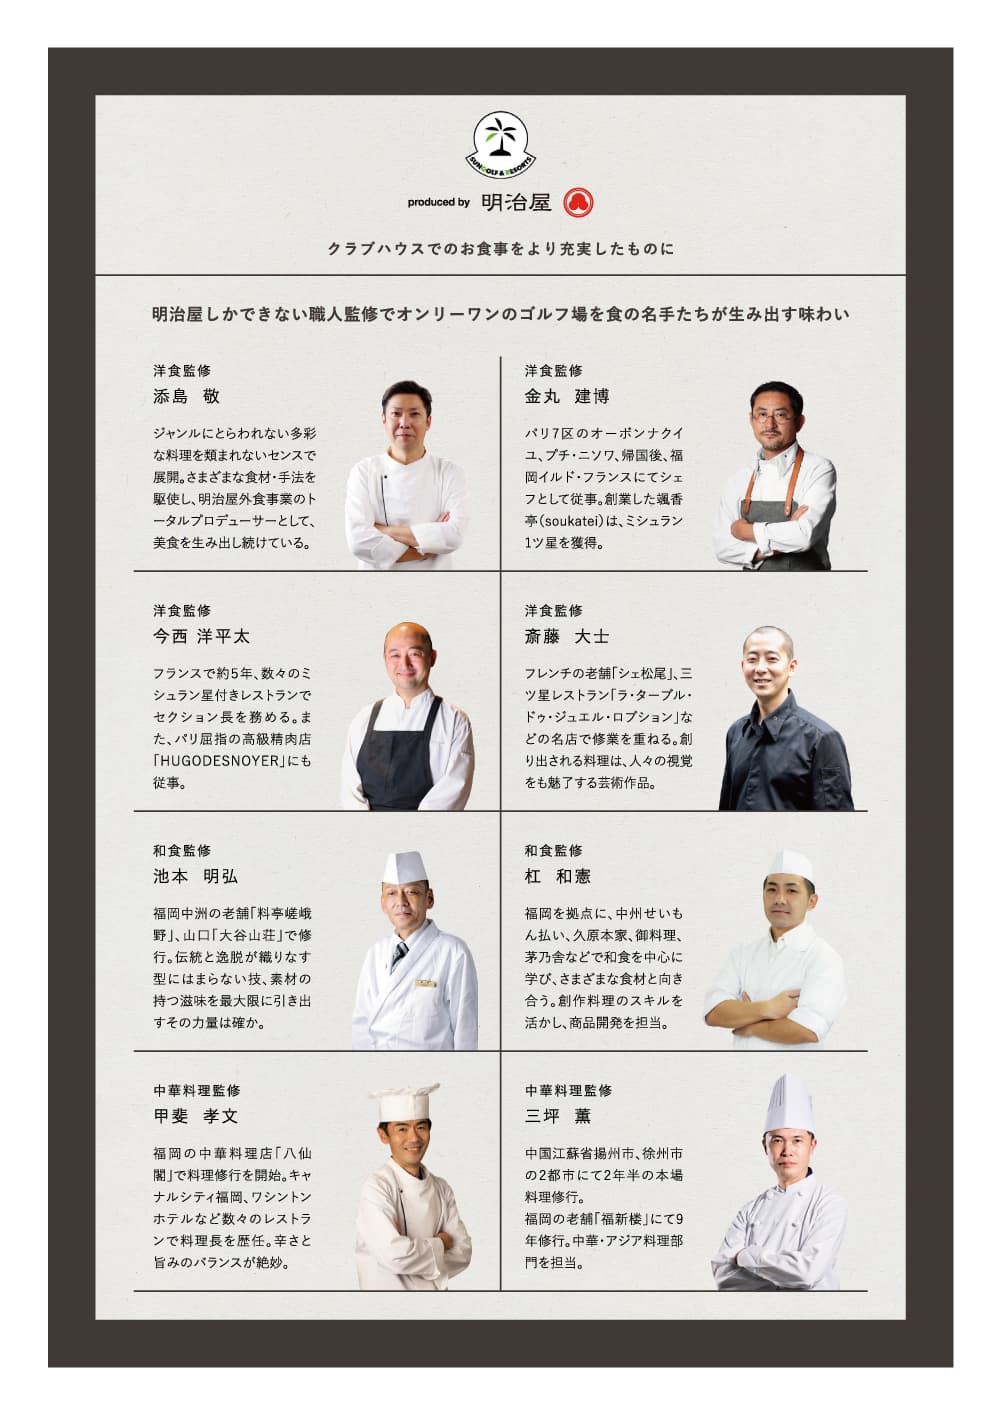 Chef introduction